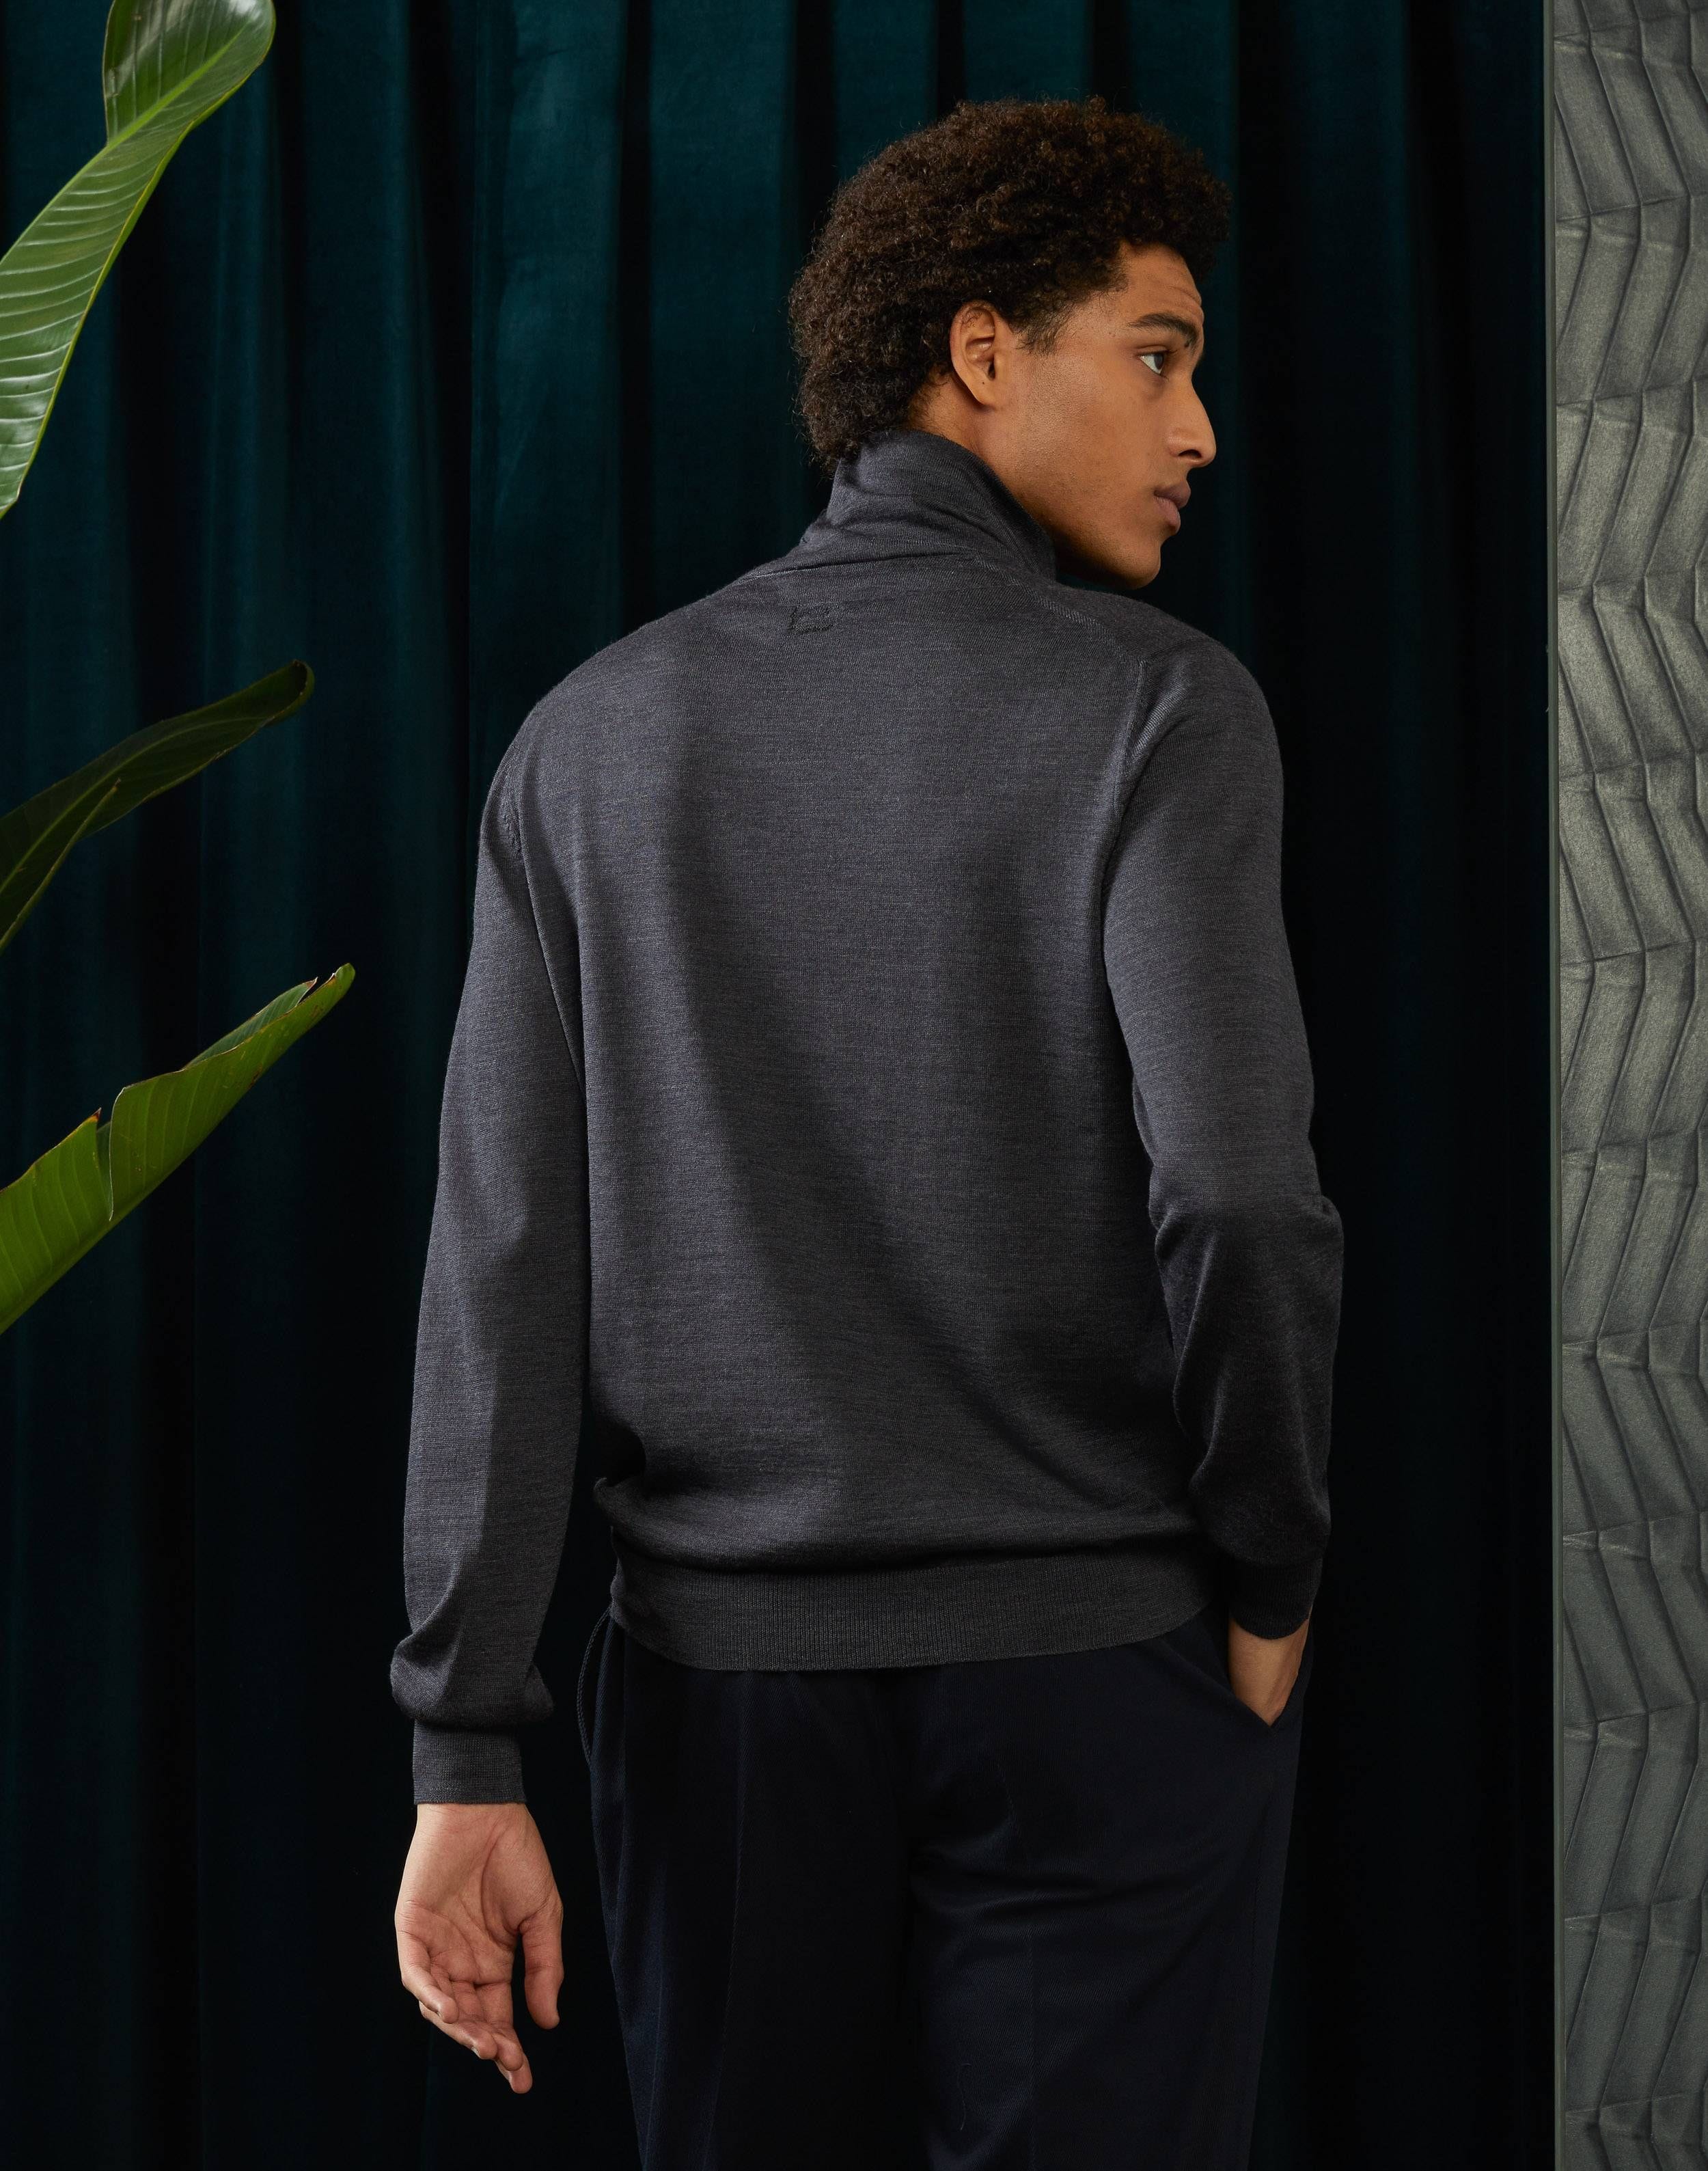 Mock neck sweater in grey total-easy-care worsted wool